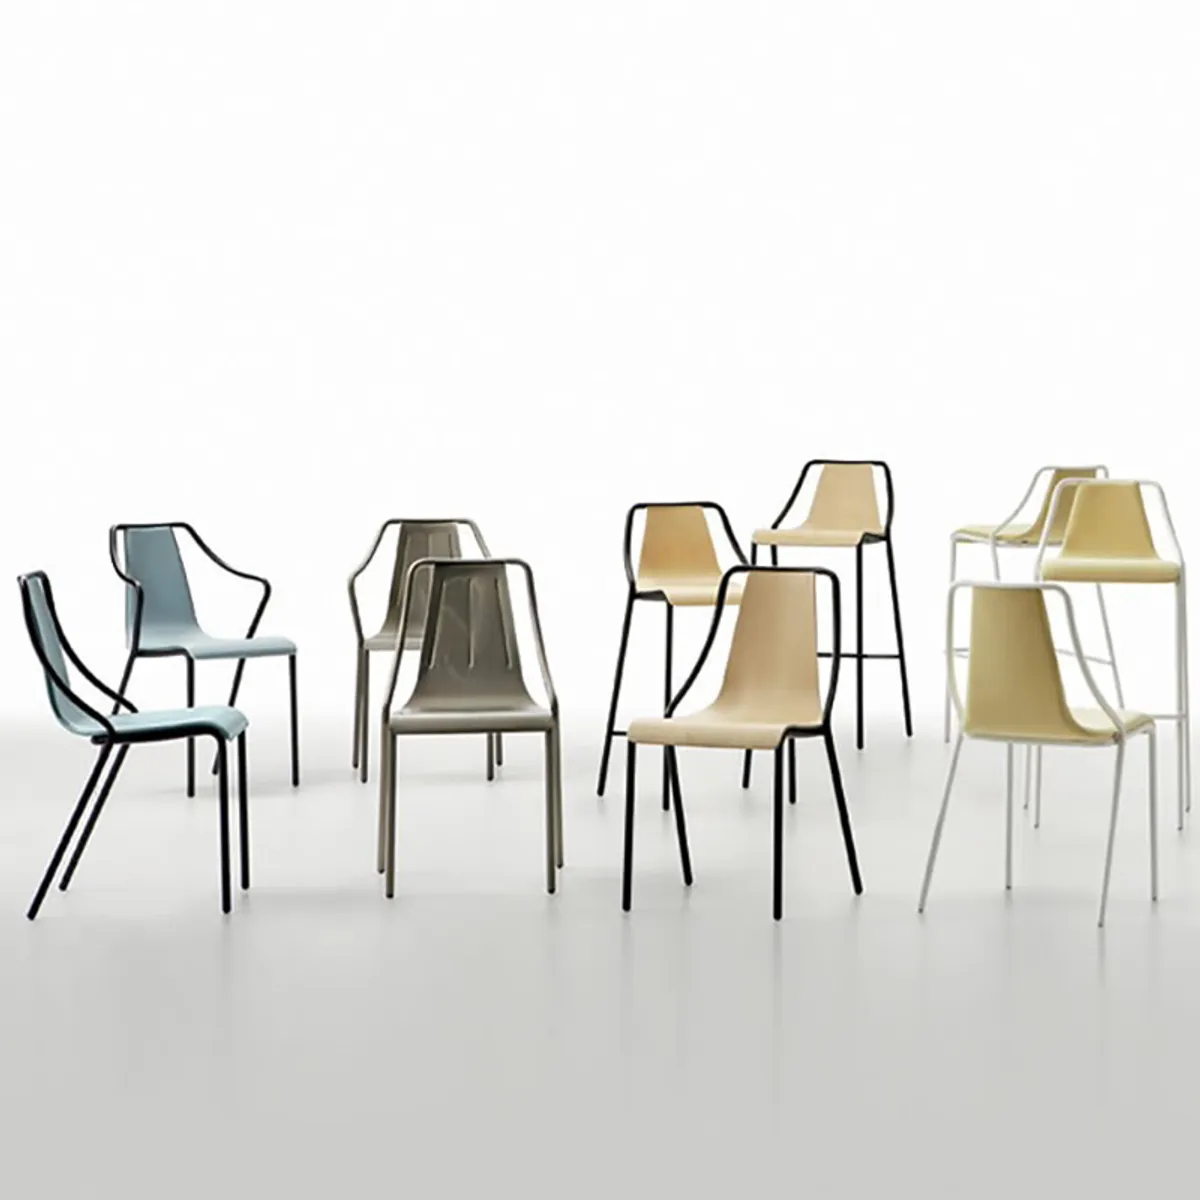 Ola Chair Collection Stackable And Suitable Furniture For Outdoors